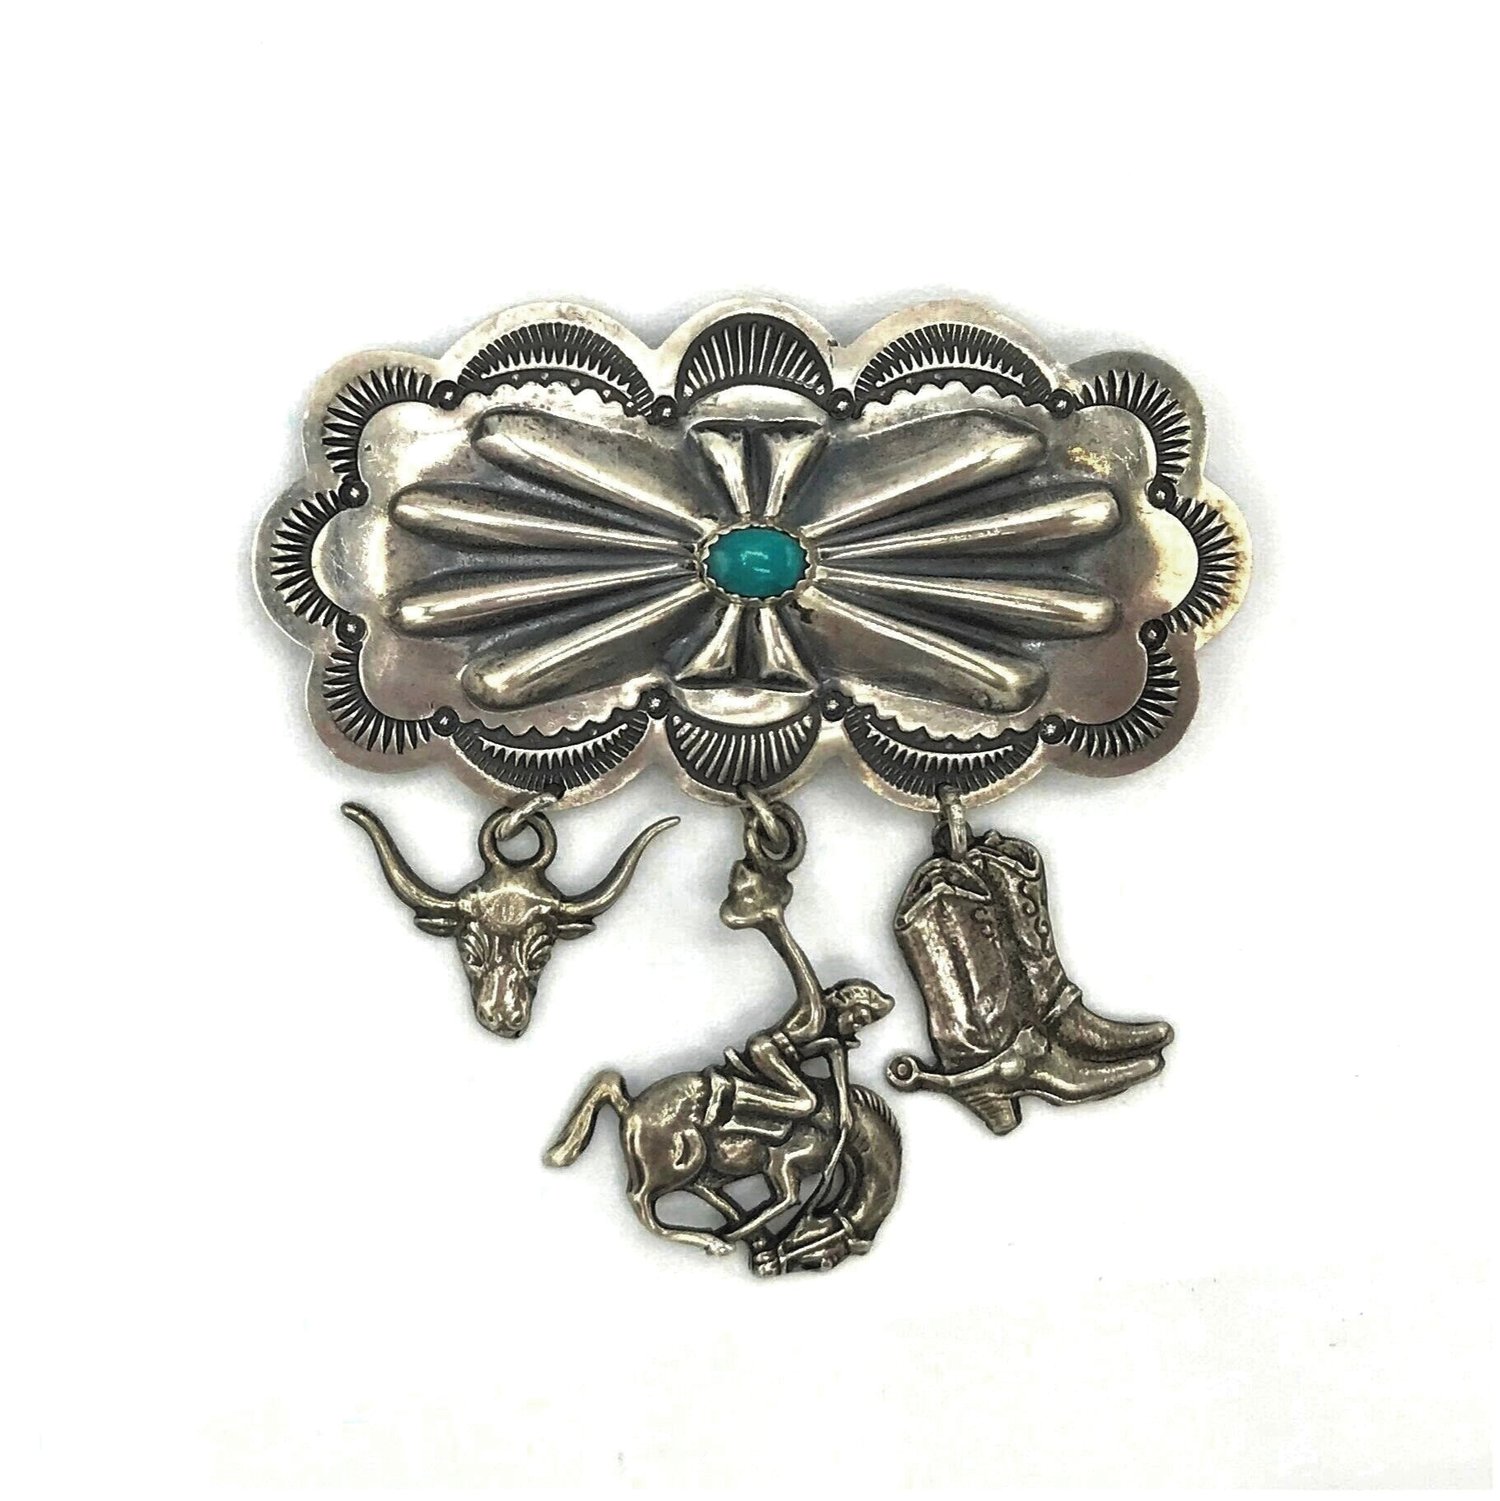 Turquoise & Tufa Vintage Navajo Silver Buckle of Repousse and Stamping